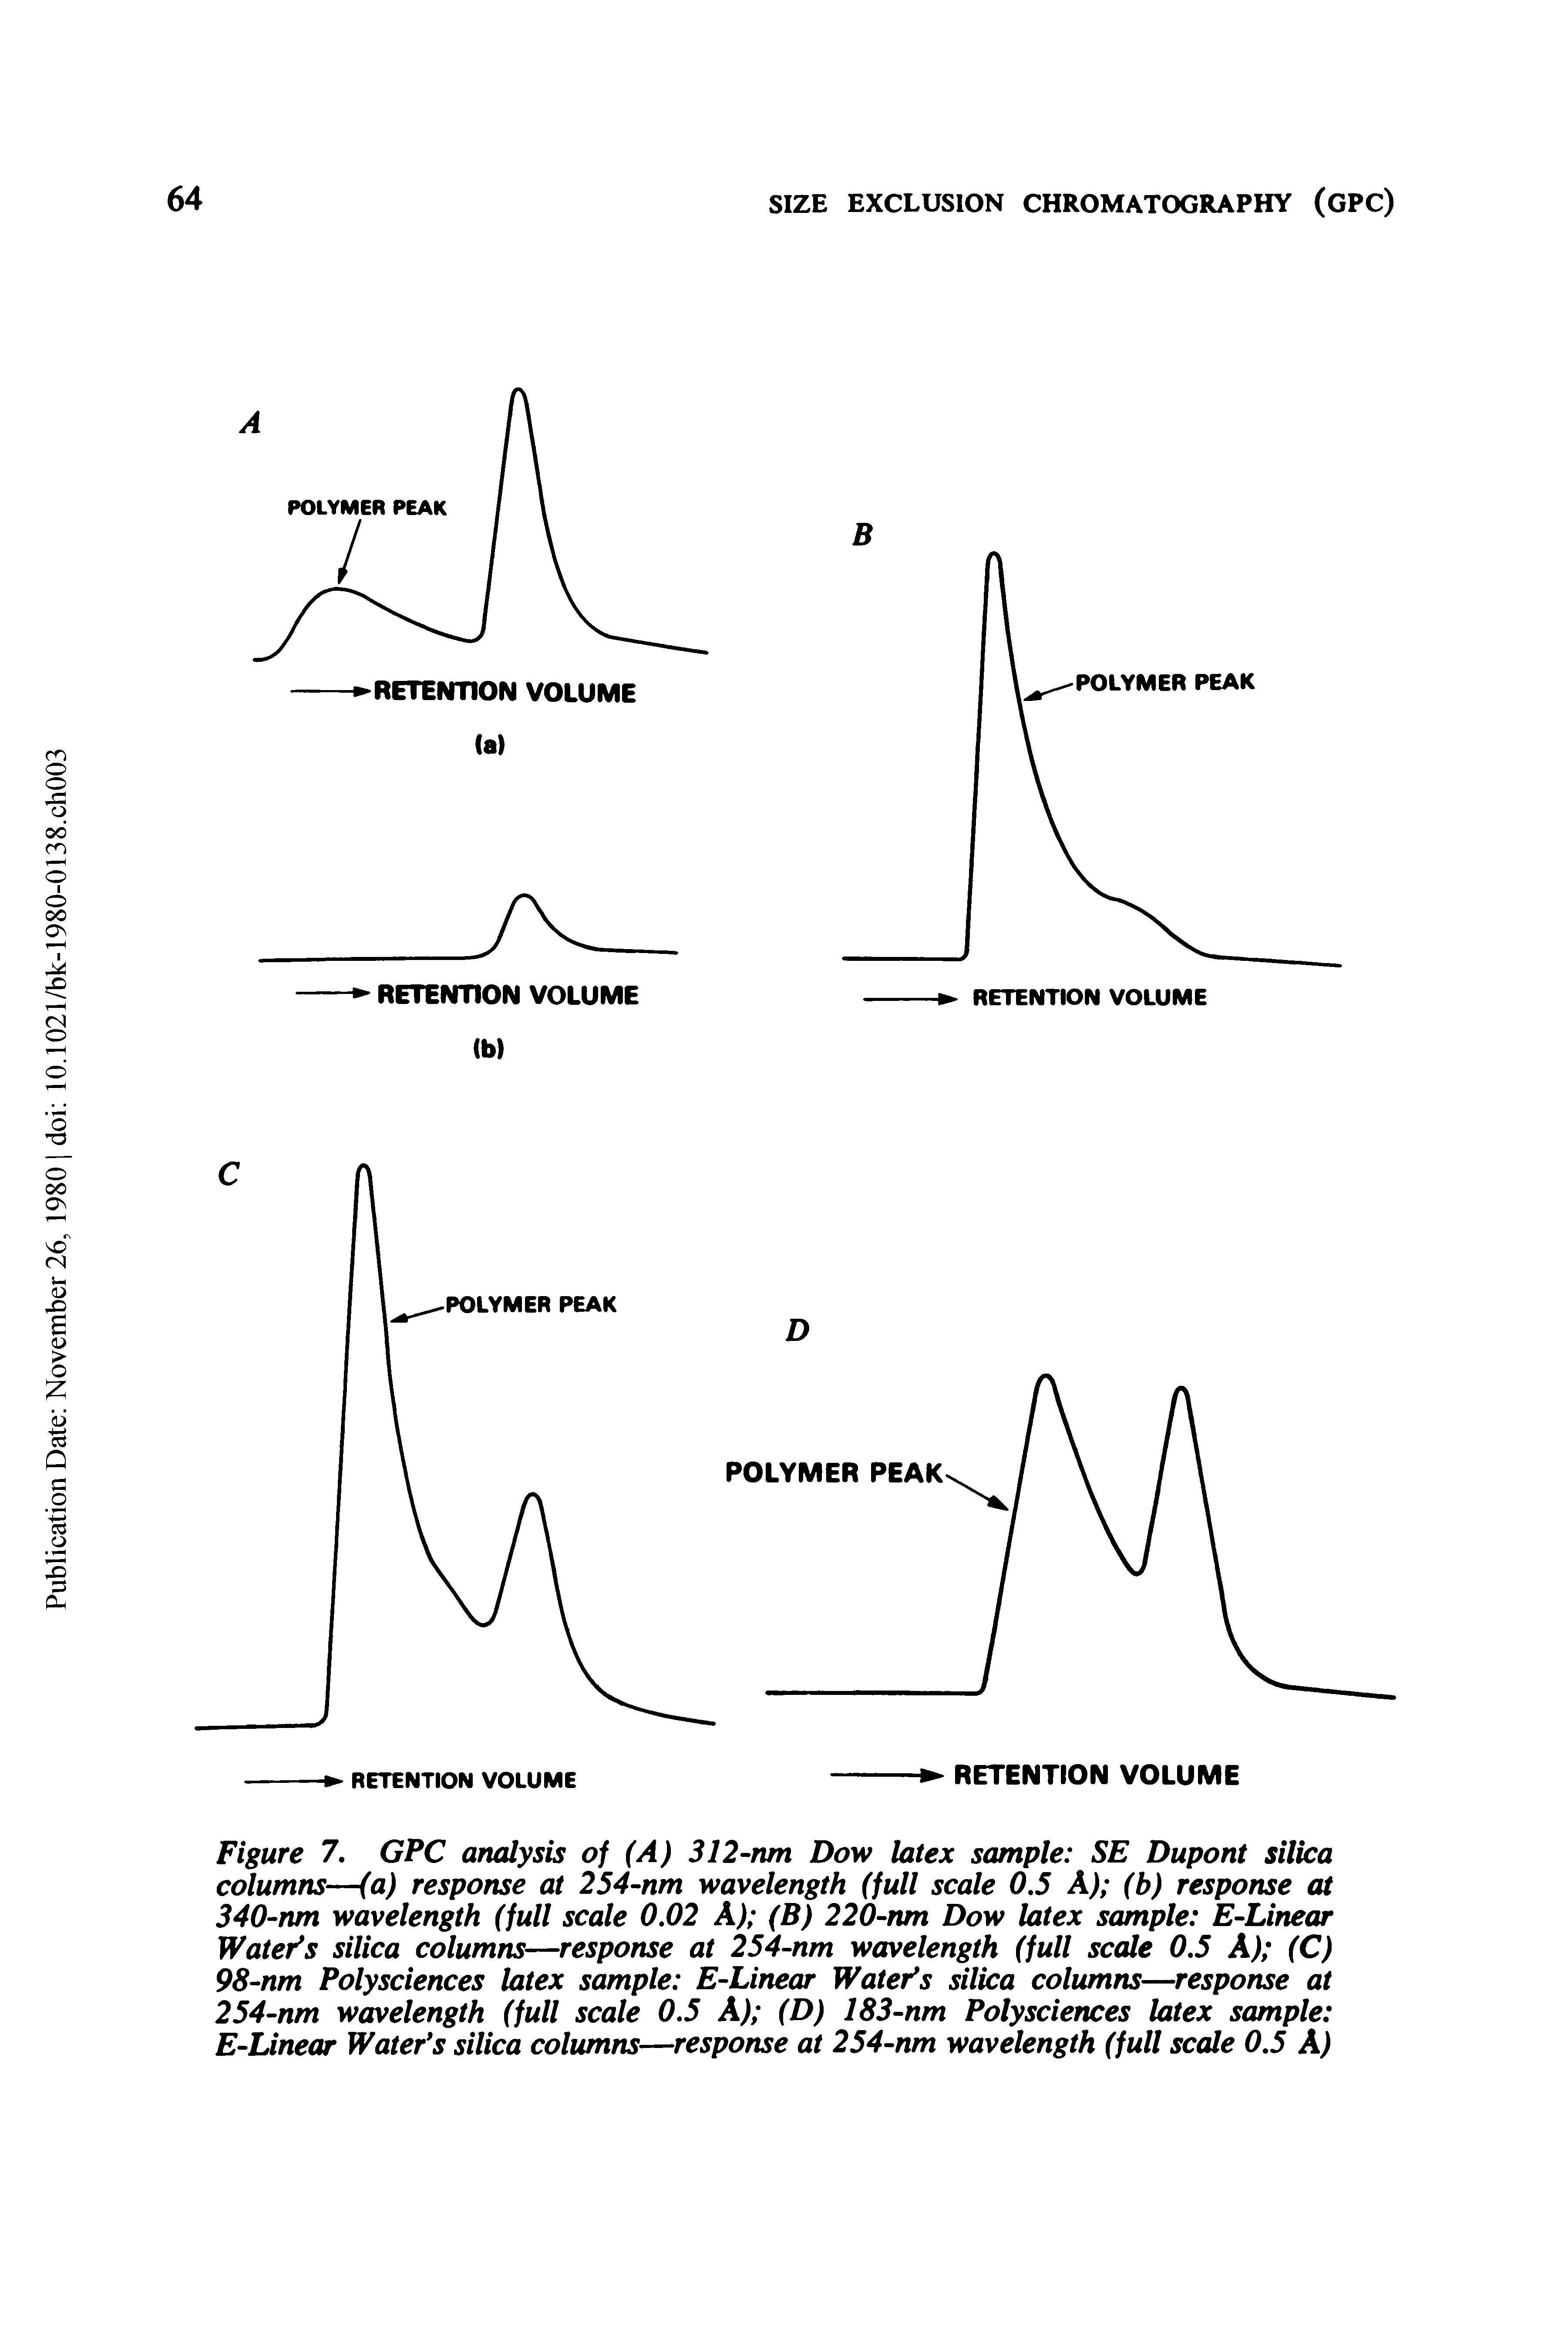 Figure 7. GPC analysis of (A) 312-nm Dow latex sample SE Dupont silica columns—(a) response at 254-nm wavelength (full scale 0.5 A) (b) response at 340-nm wavelength (full scale 0.02 A) (B) 220-nm Dow latex sample E-Linear Watefs silica columns—response at 254-nm wavelength (full scale 0.5 A) (C) 98-nm Polysciences latex sample E-Linear WatePs silica columns—response at 254-nm wavelength (full scale 0.5 A) (D) 183-nm Polysciences latex sample E-Linear Water s silica columns—response at 254-nm wavelength (full scale 0.5 A)...